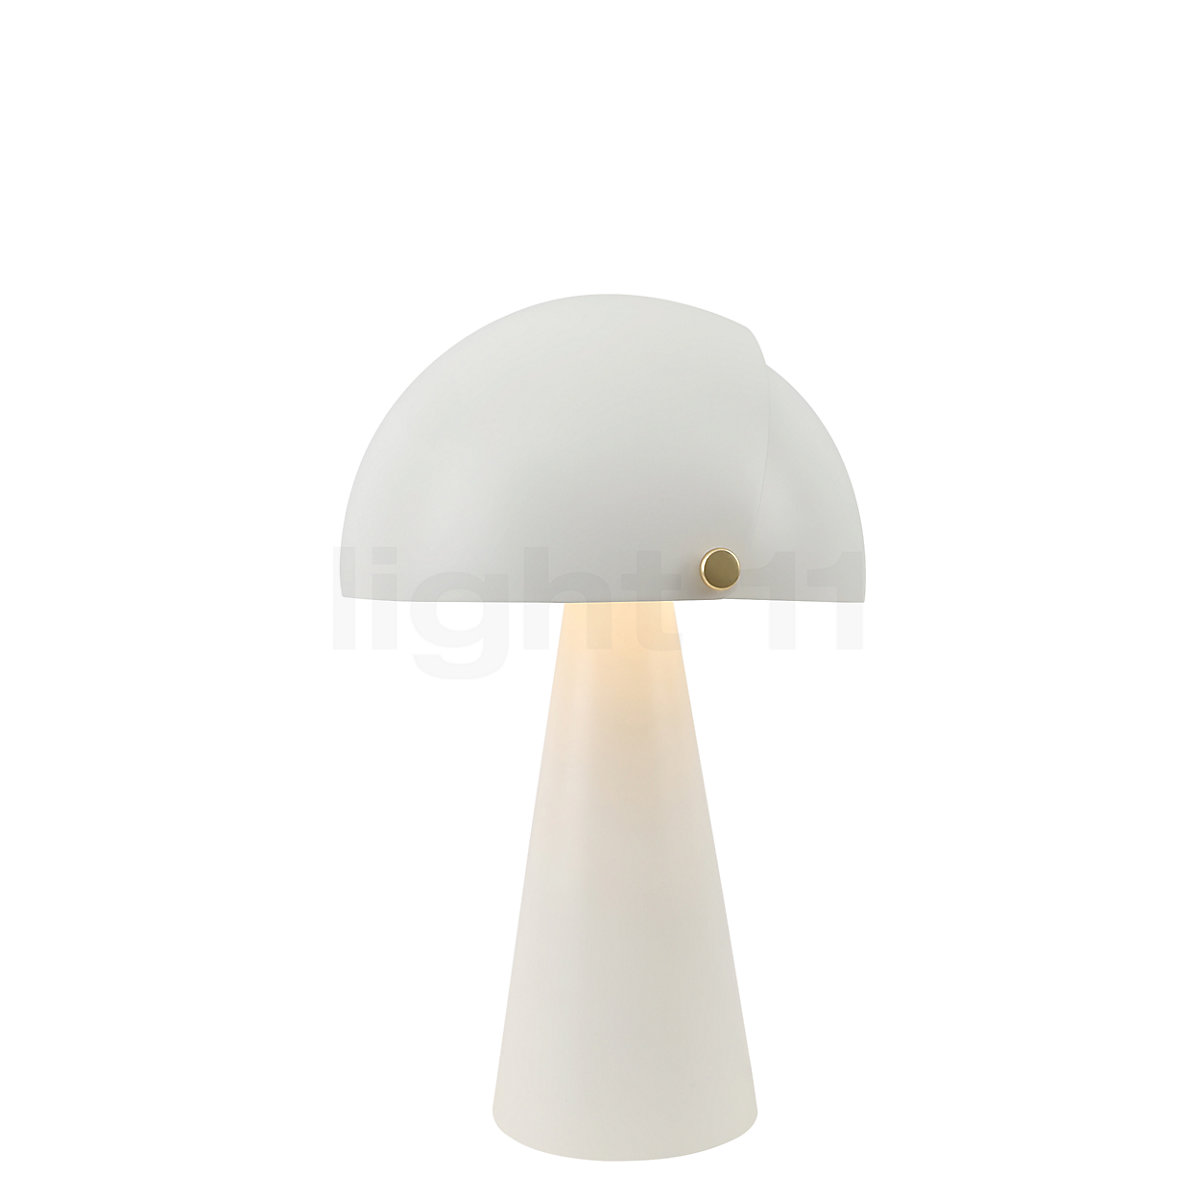 Buy Design for the People Align Table Lamp at